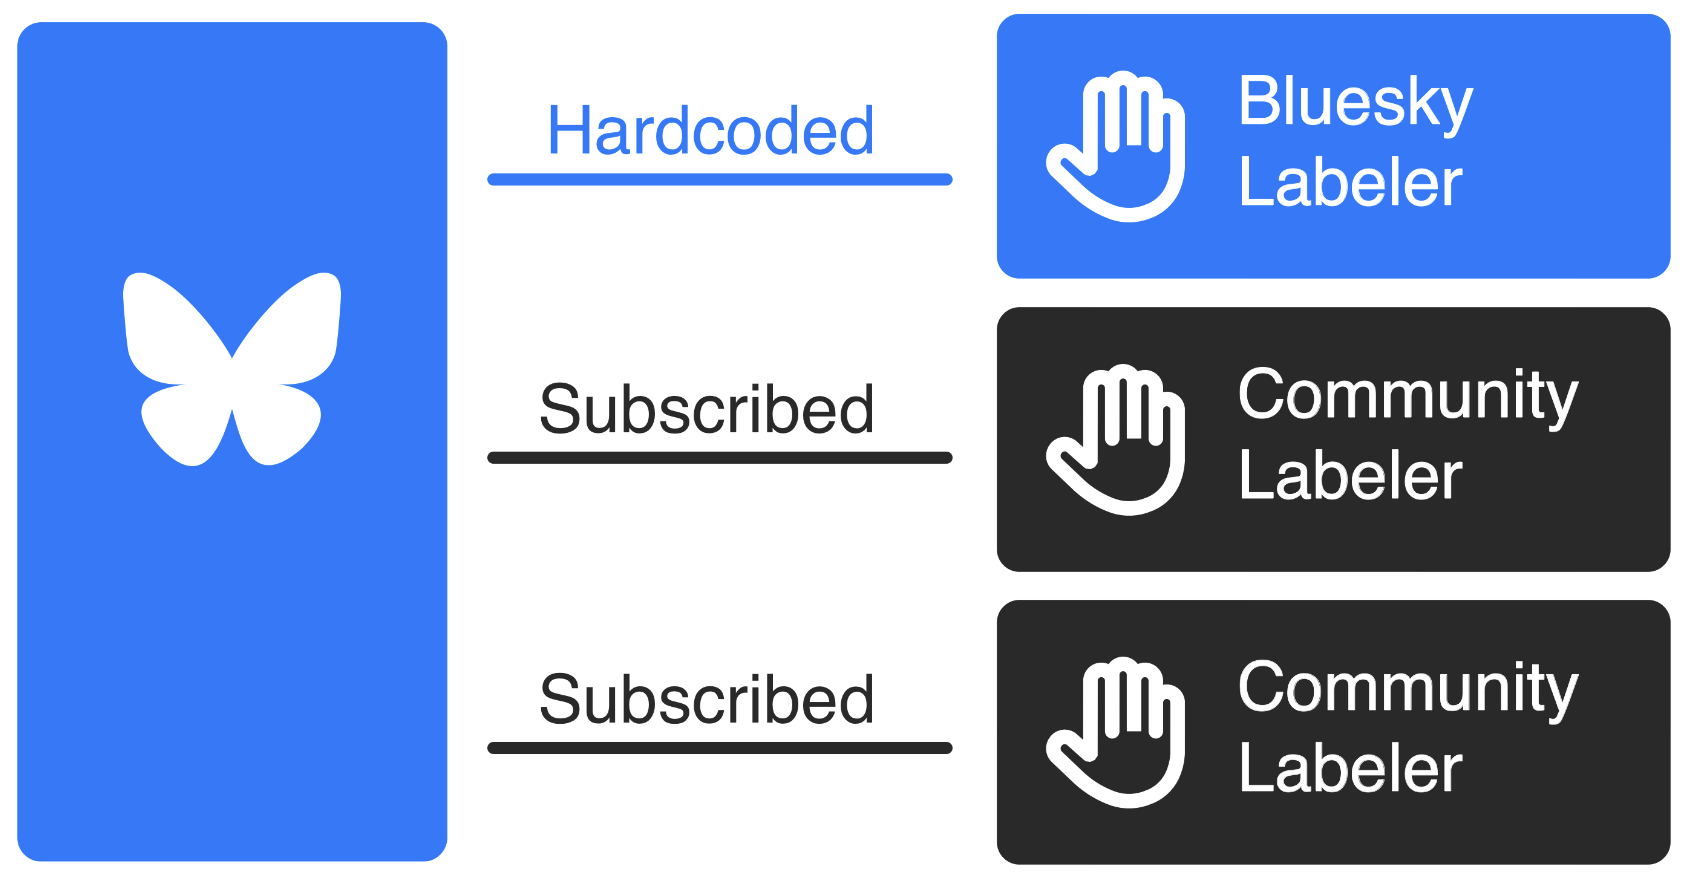 The Bluesky application hardcodes its labeling and then stacks community labelers on top.